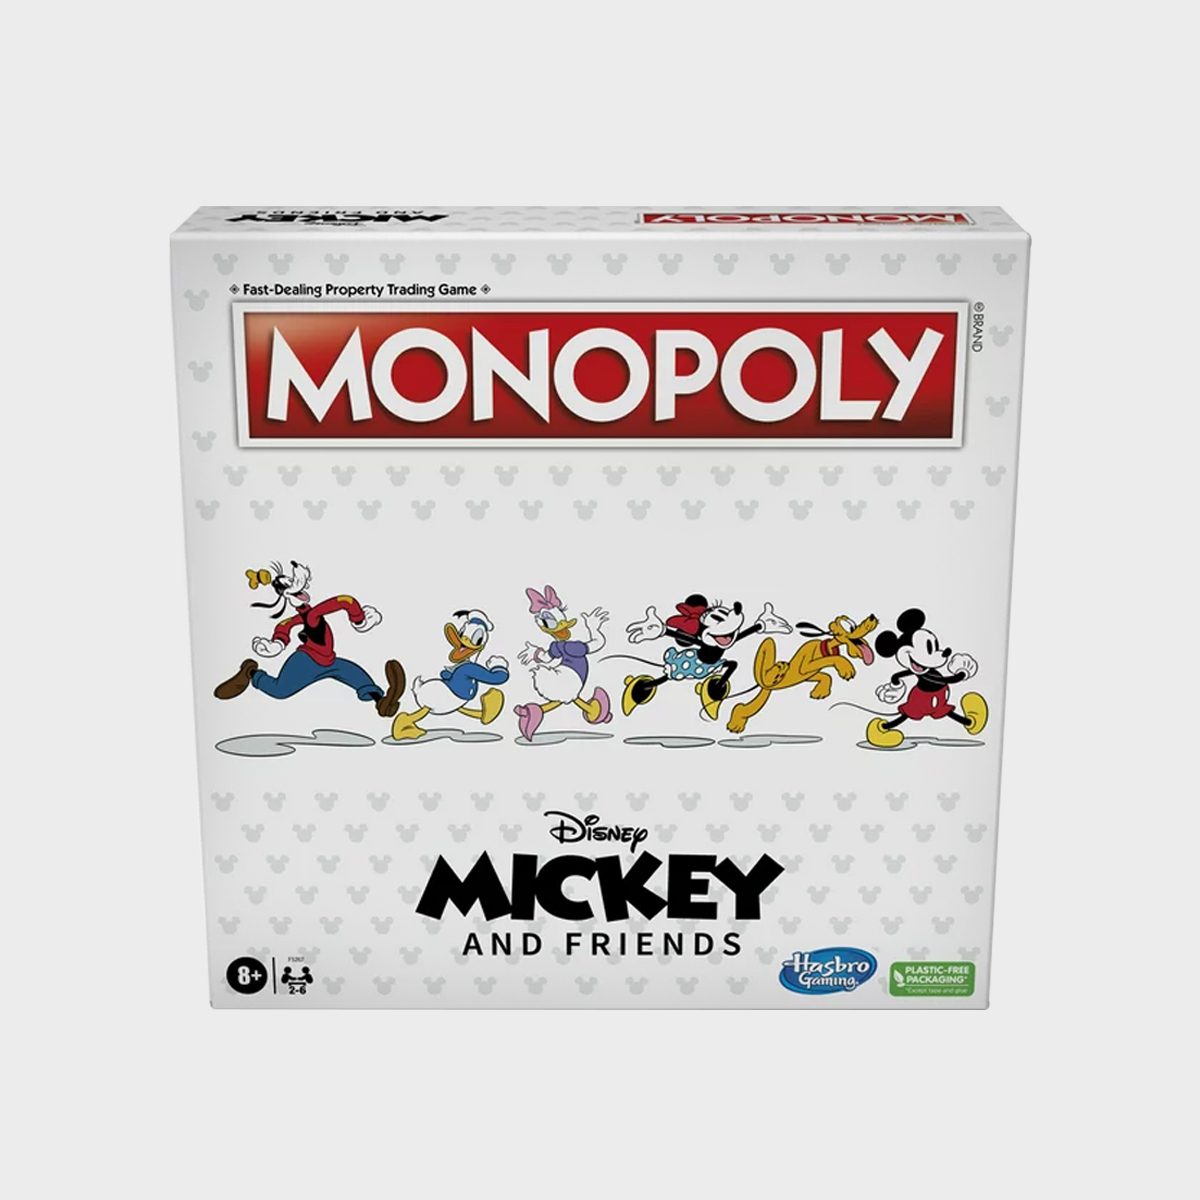 https://www.rd.com/wp-content/uploads/2023/02/Monopoly-Disney-Mickey-and-Friends-Edition-Board-Game-ecomm-walmart.com_.jpg?fit=700%2C700